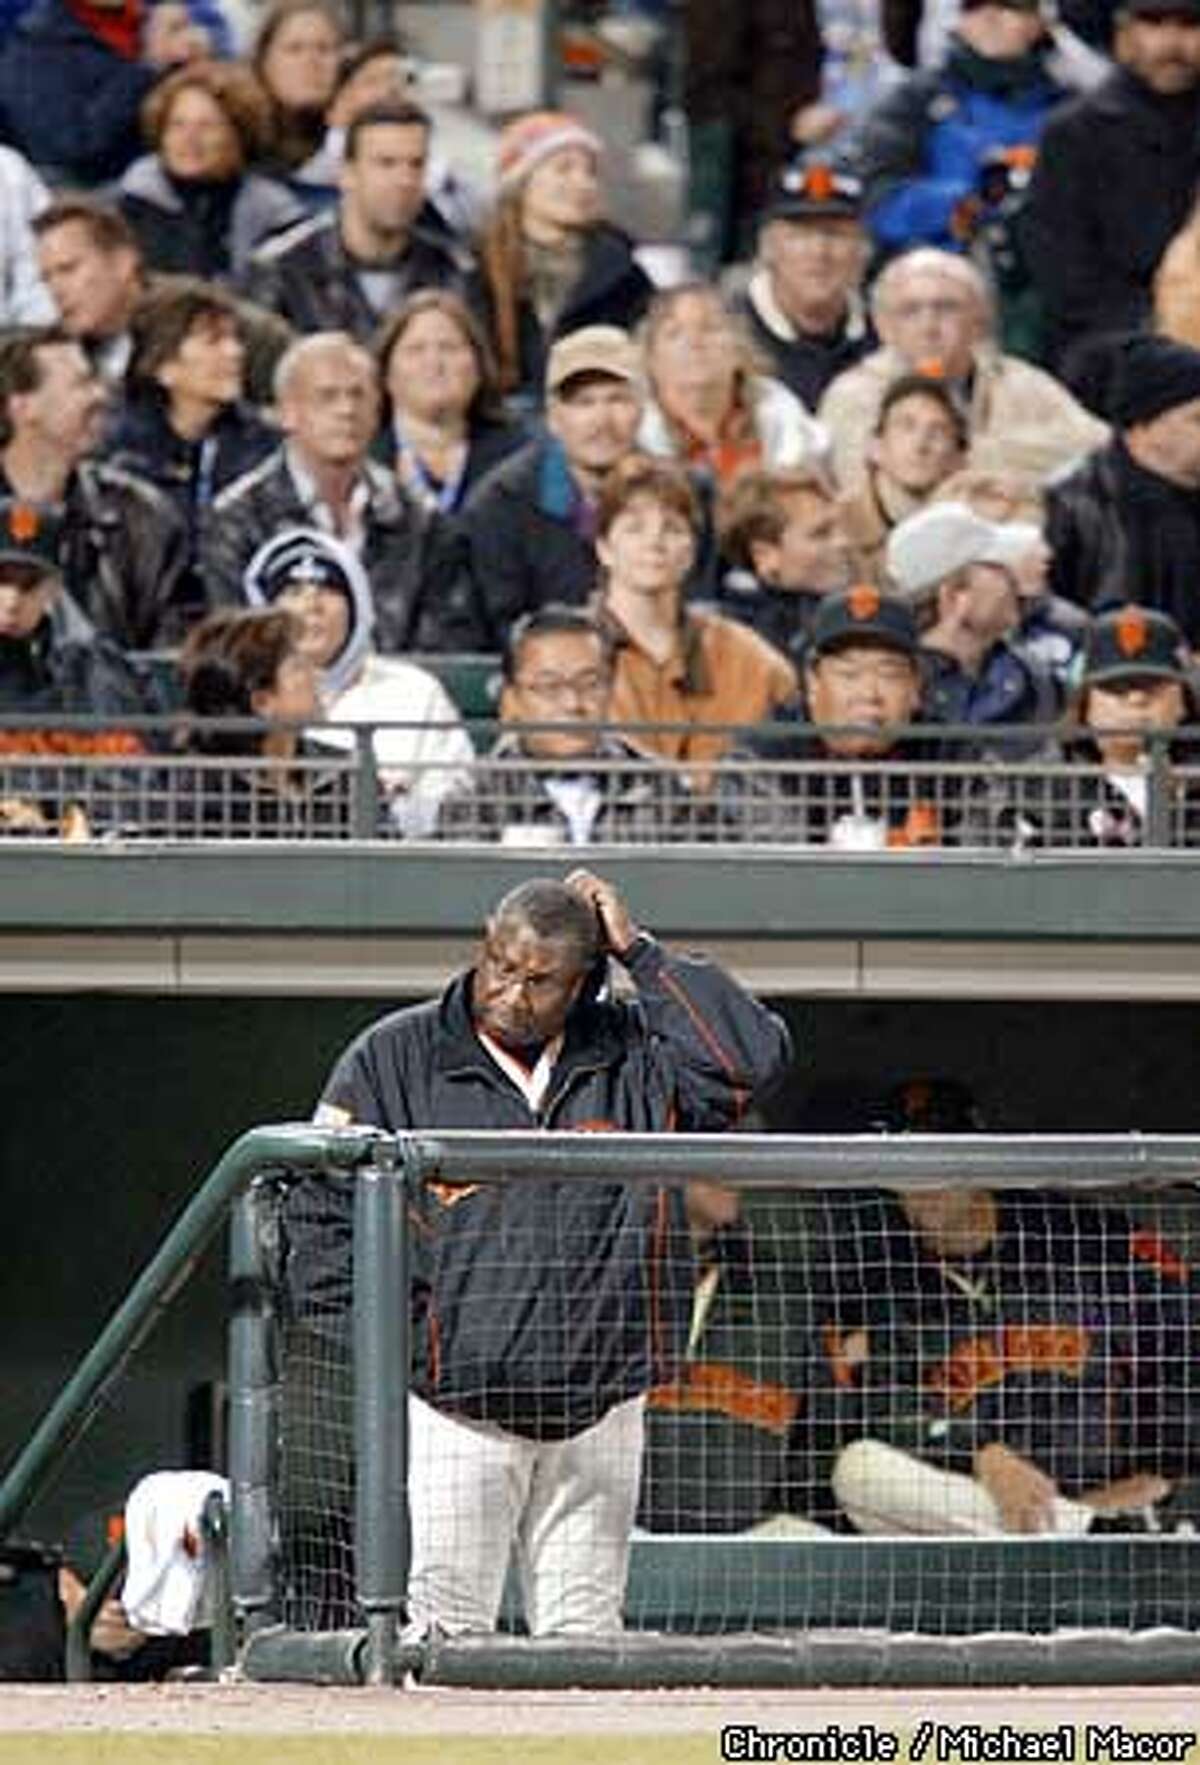 .jpg---Giants manager Dusty Baker scratches head as the Giants our down to their last out in the ninth inning. The San Francisco Giants play the Anaheim Angels in Game 3 of the World Series at Pac Bell Park in San Francisco, Ca., October 22, 2002. Michael Macor/San Francisco Chronicle